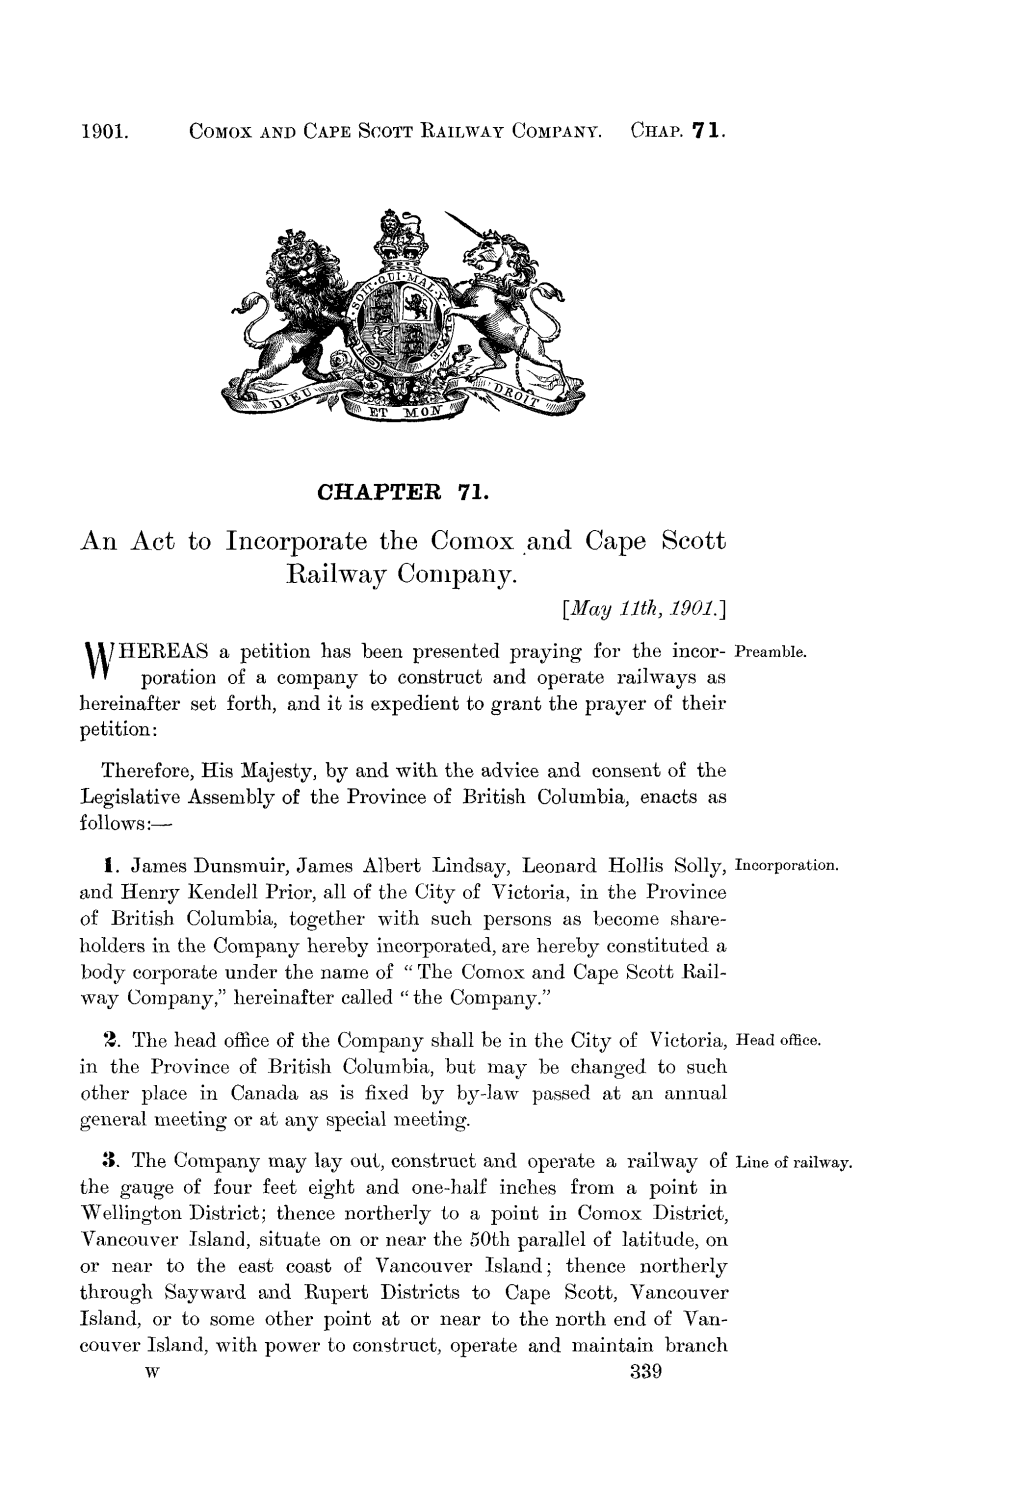 An Act to Incorporate the Comox and Cape Scott Railway Company. [May 11Th, 1901.]